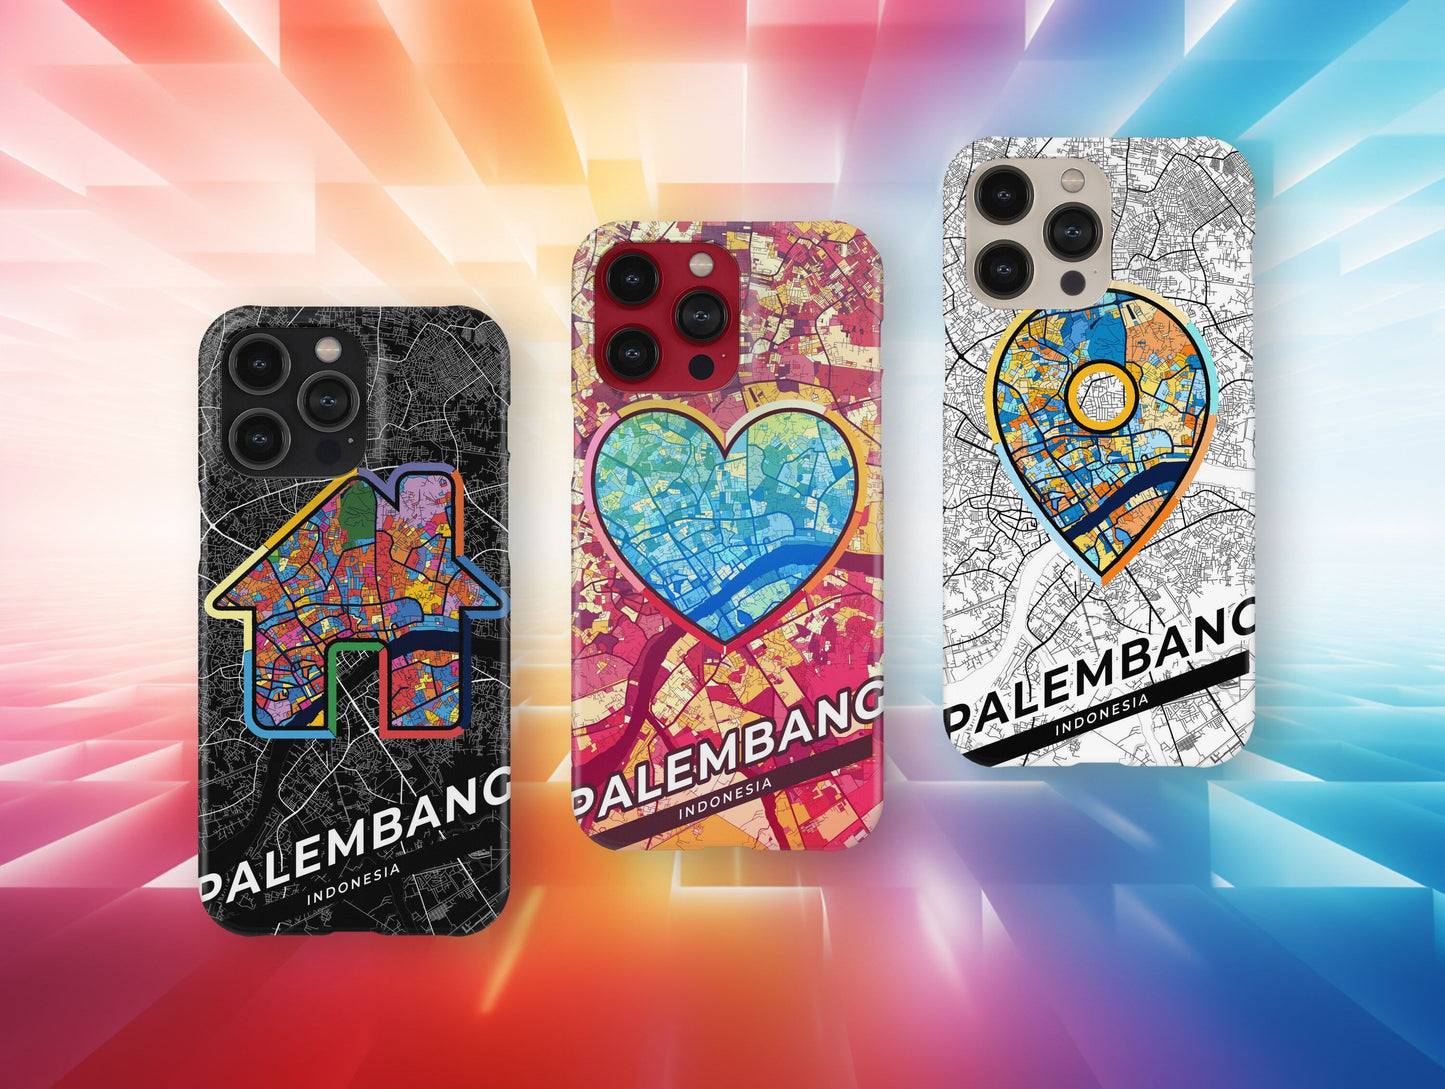 Palembang Indonesia slim phone case with colorful icon